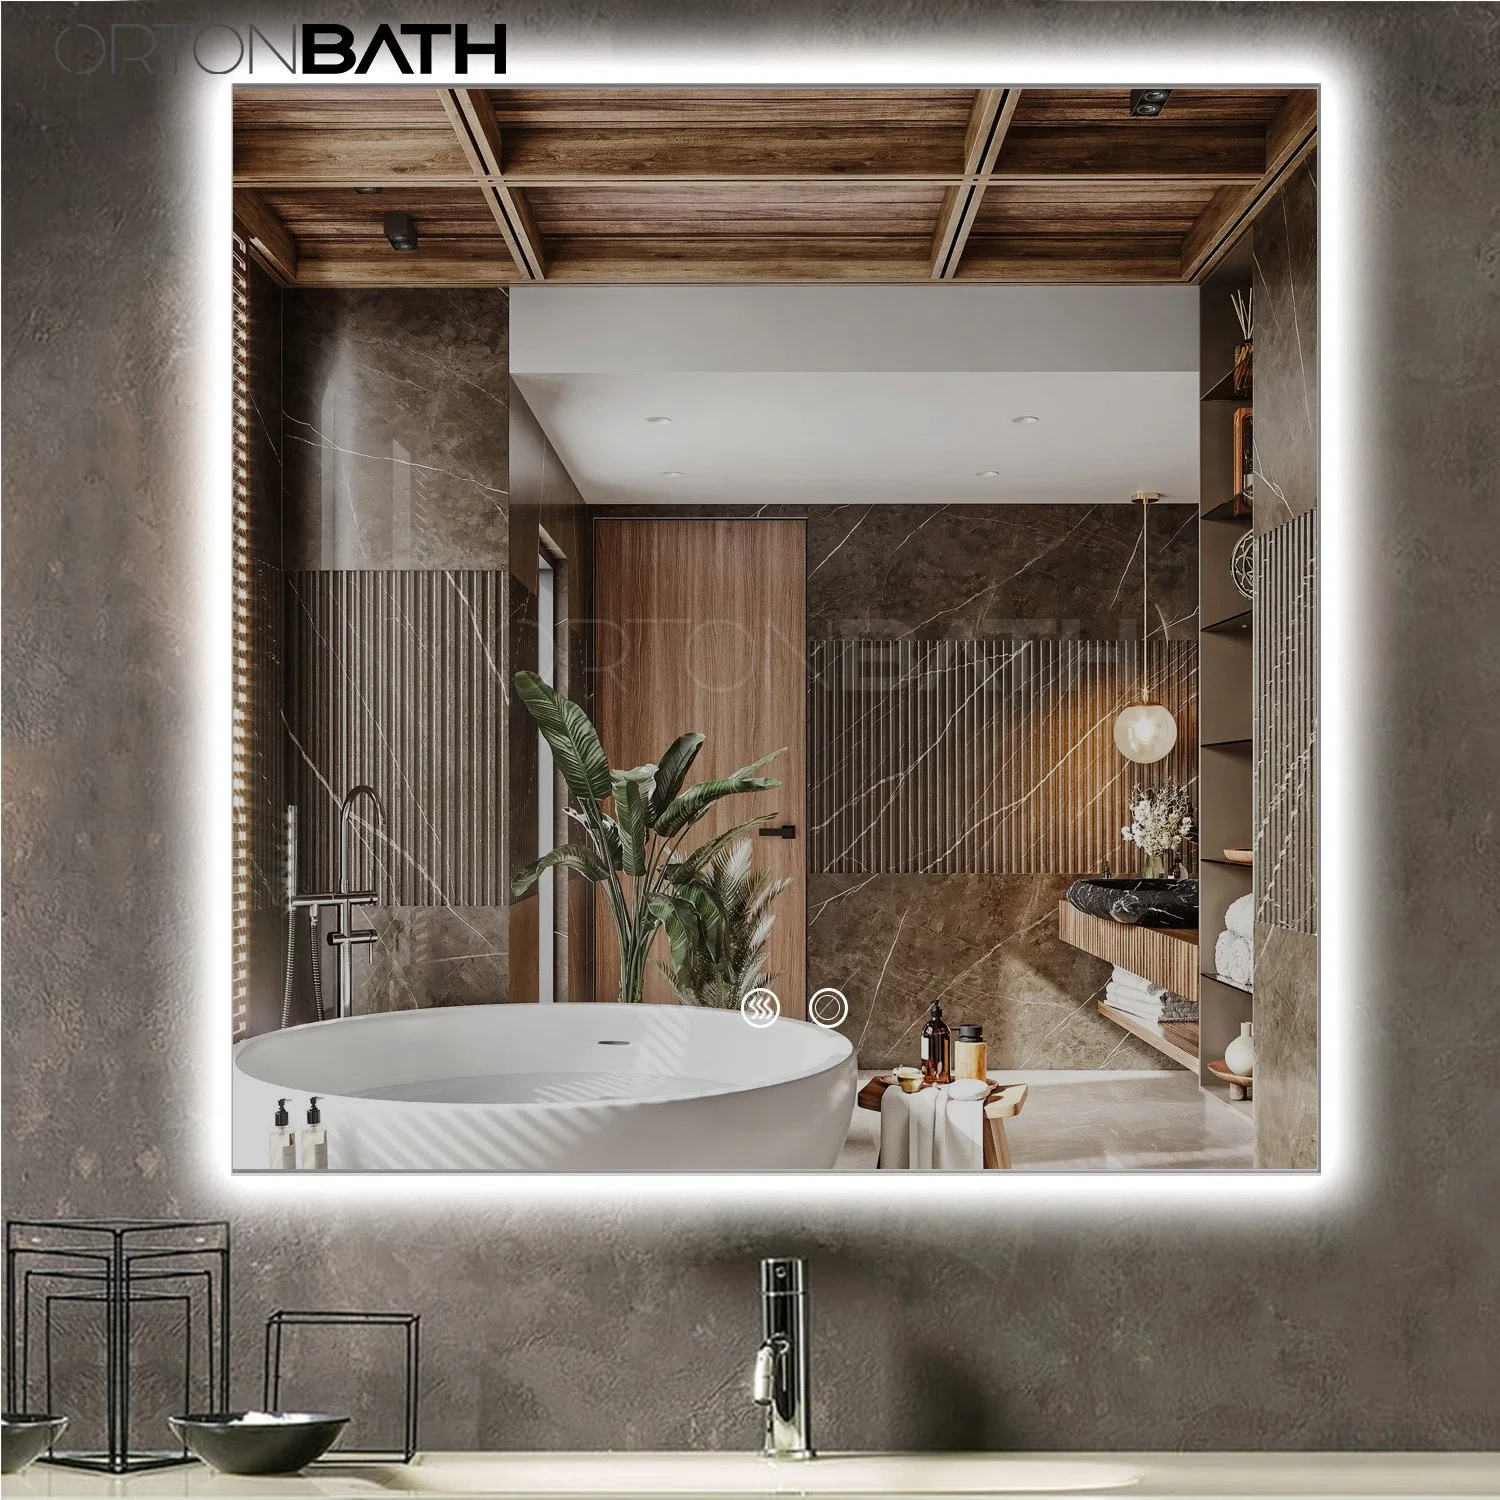 Ortonbath 36 X 36 Inch LED Bathroom Mirror Backlit Mirror Square Lighted Bathroom Mirror Anti-Fog Wall Mounted LED Vanity Mirror Large Dimmable Makeup Mirror